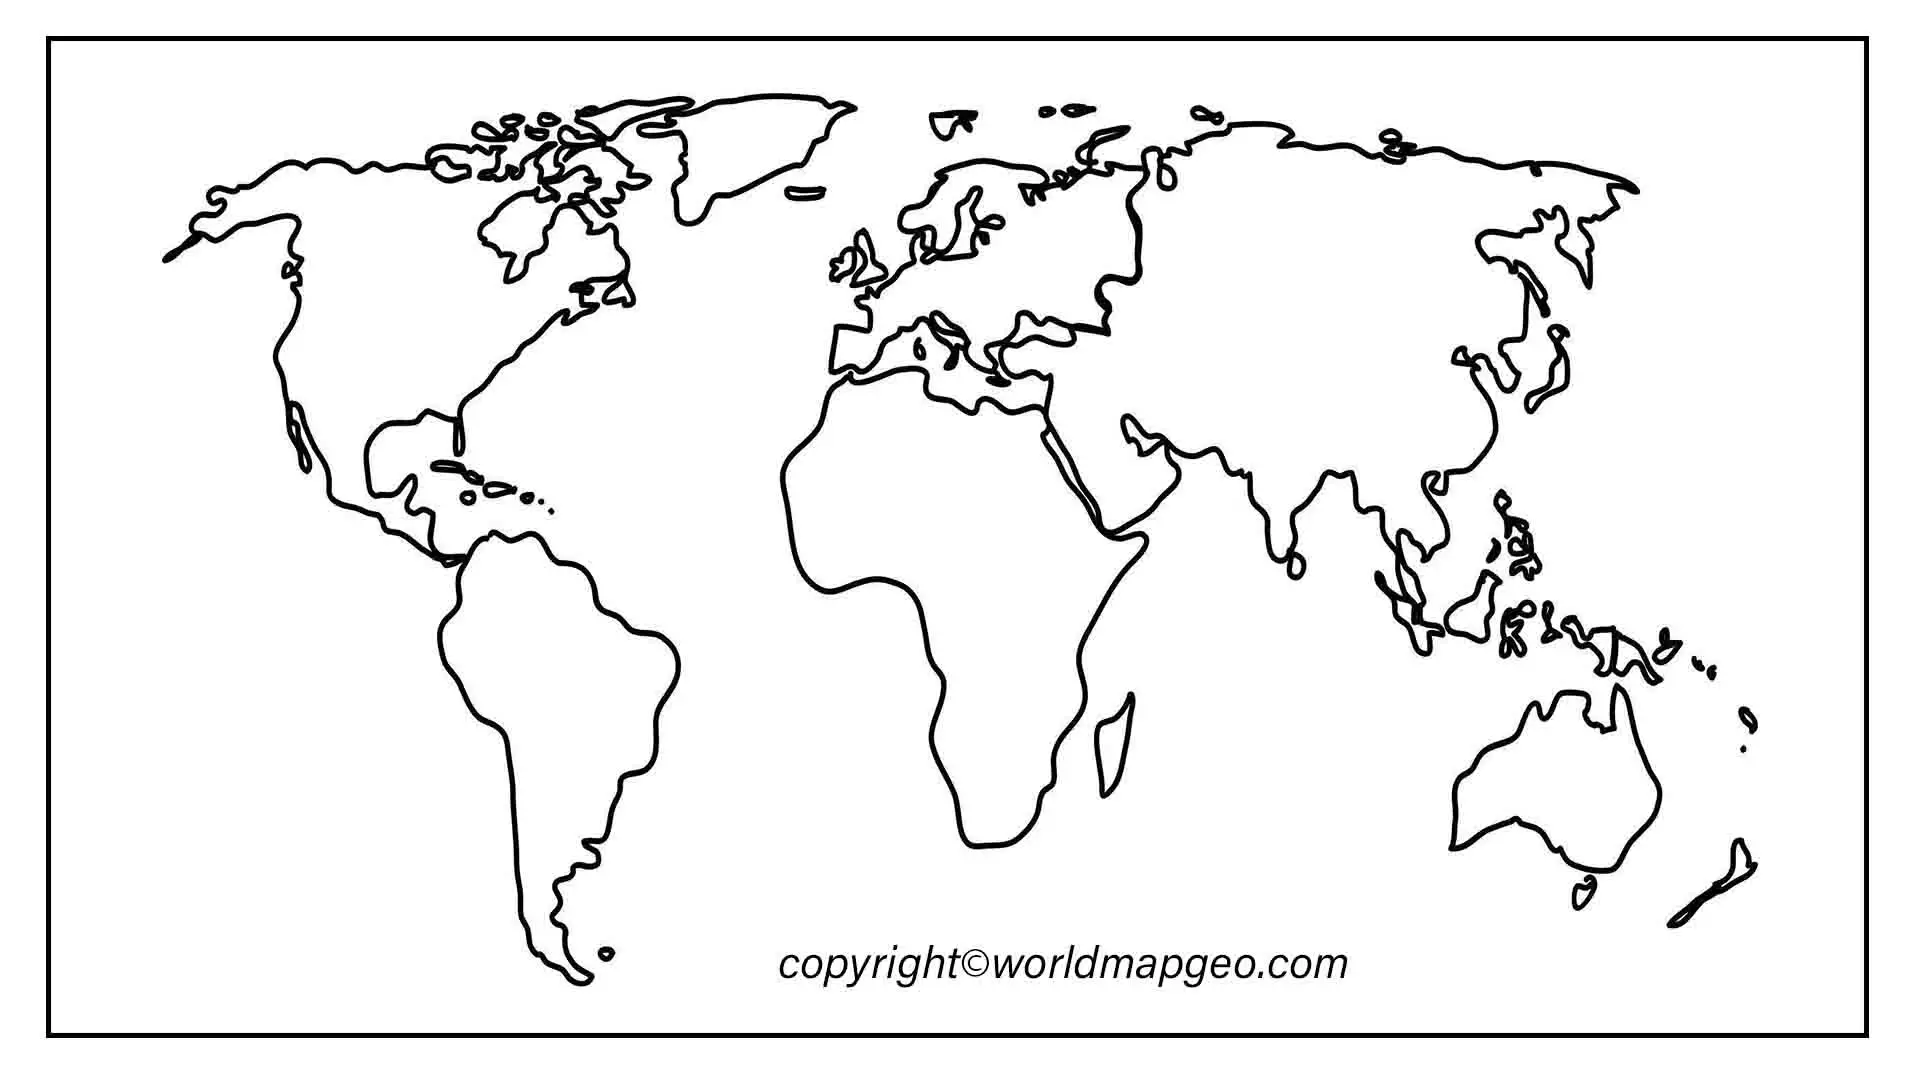 Blank World Map Black and White